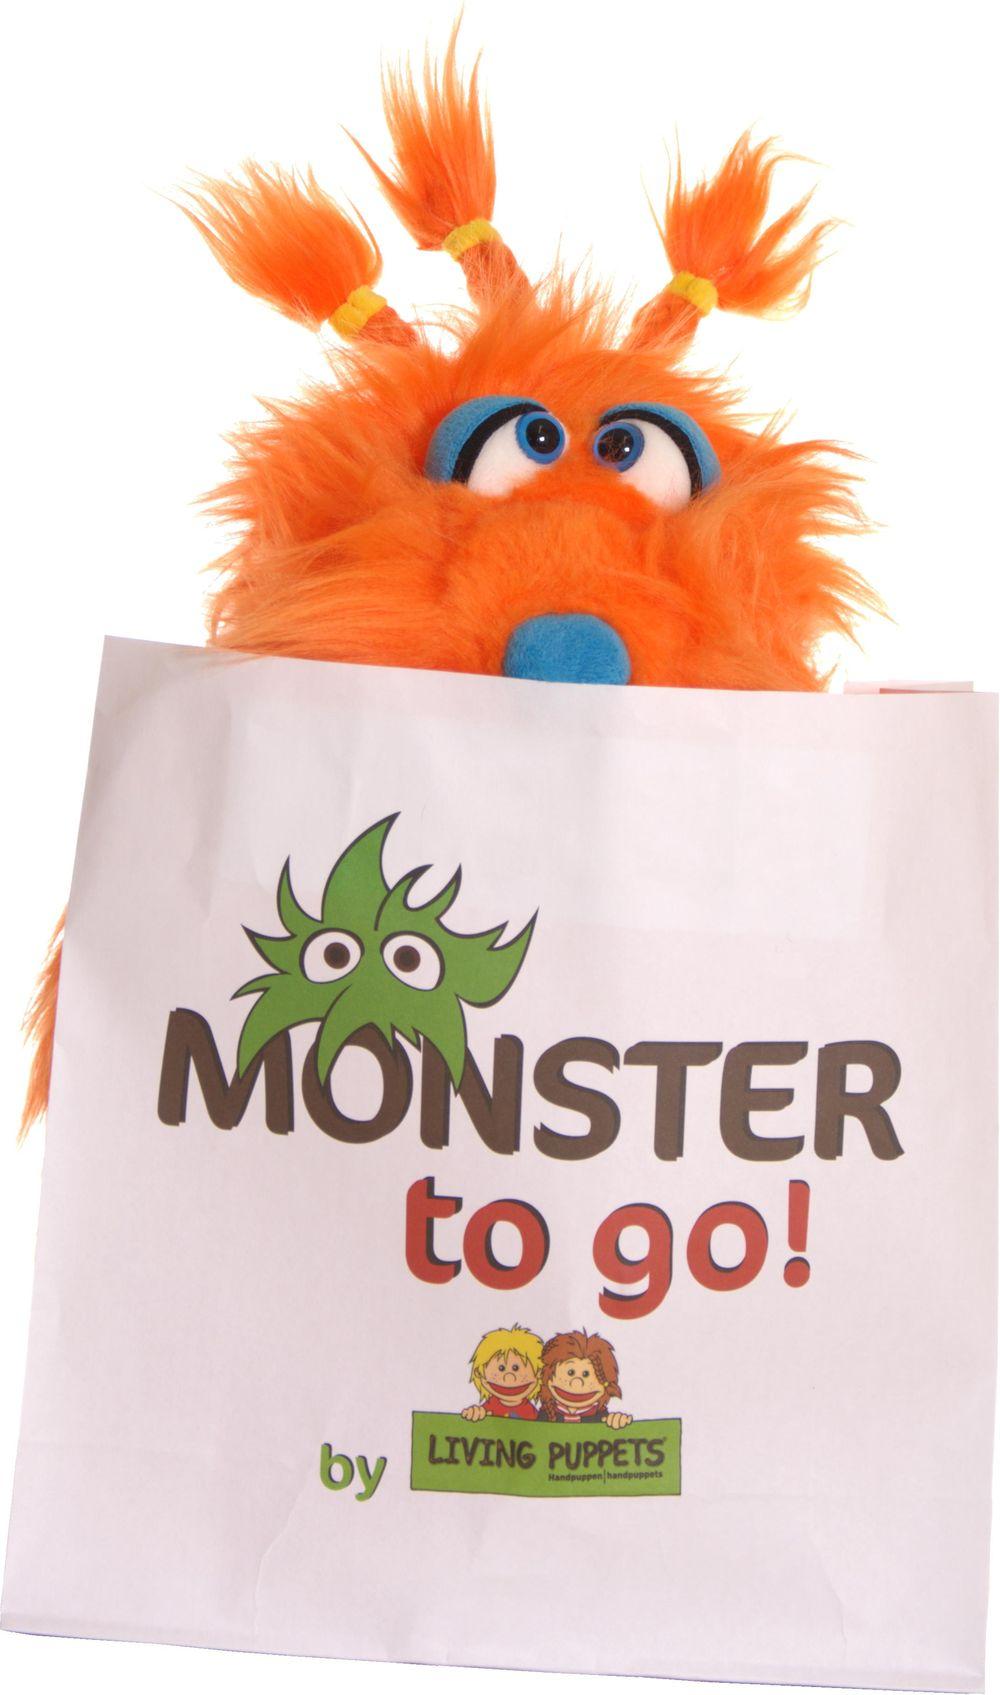 Living Puppets Monster to Go - Wumms (orange)